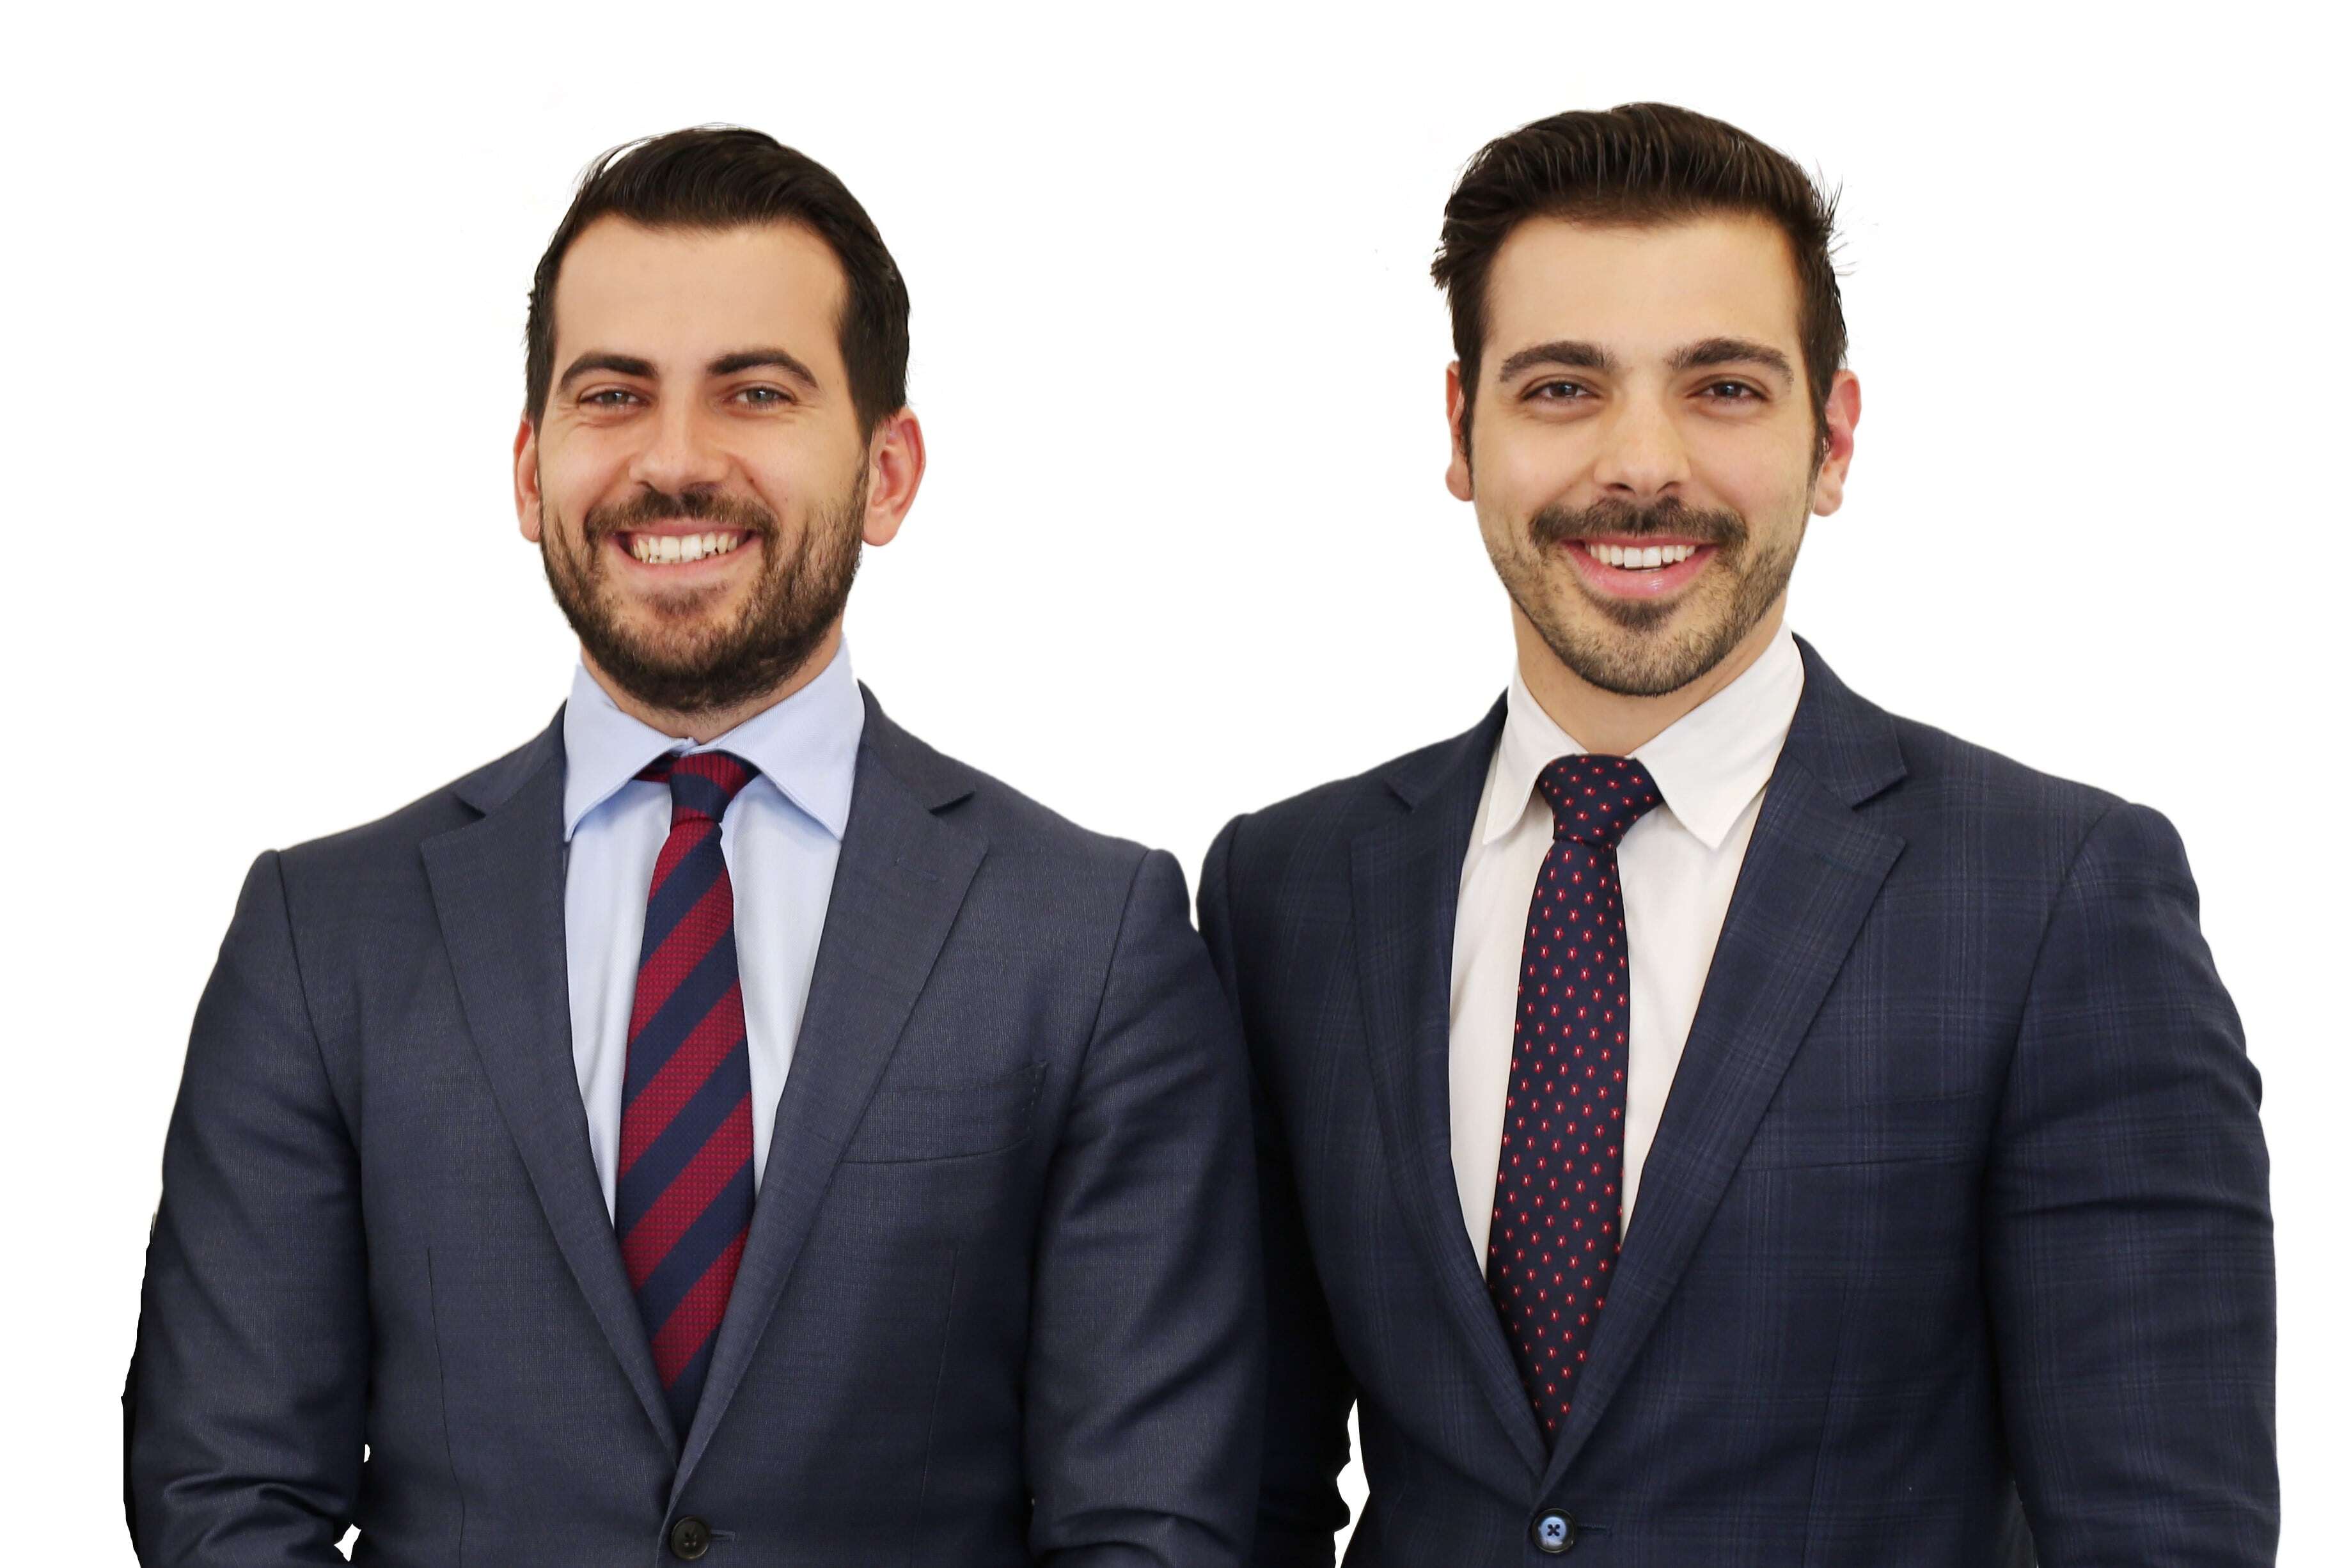 Knight Frank appoints new Joint Heads for its South Sydney office